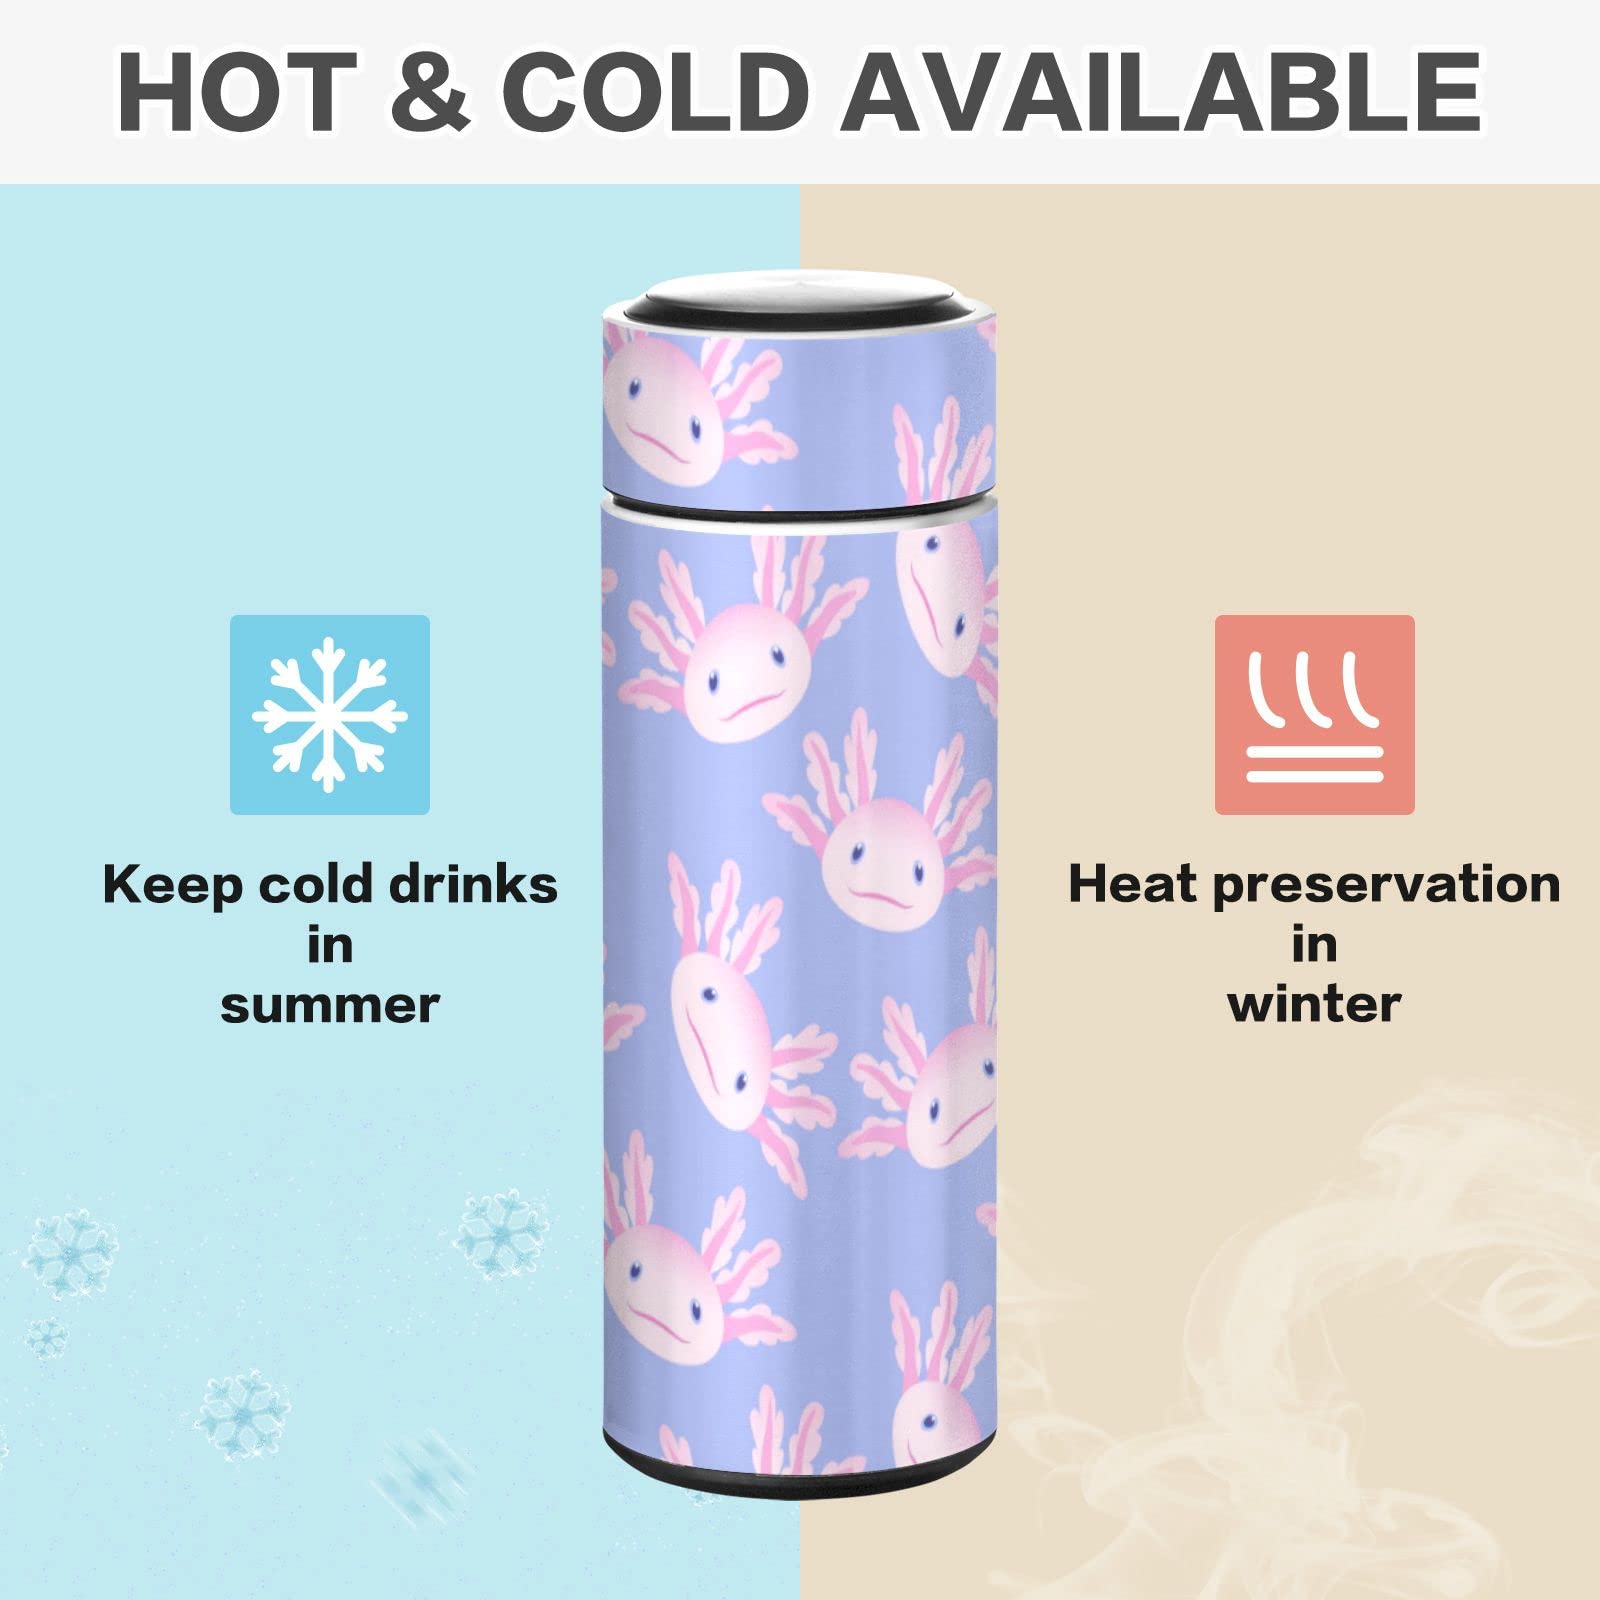 Glaphy Cute Pink Animal Axolotl Water Bottle, BPA-Free, Stainless Steel, 17 oz Insulated Water Bottles Kids, for School, Office, Gym, Sports, Travel, 500ml